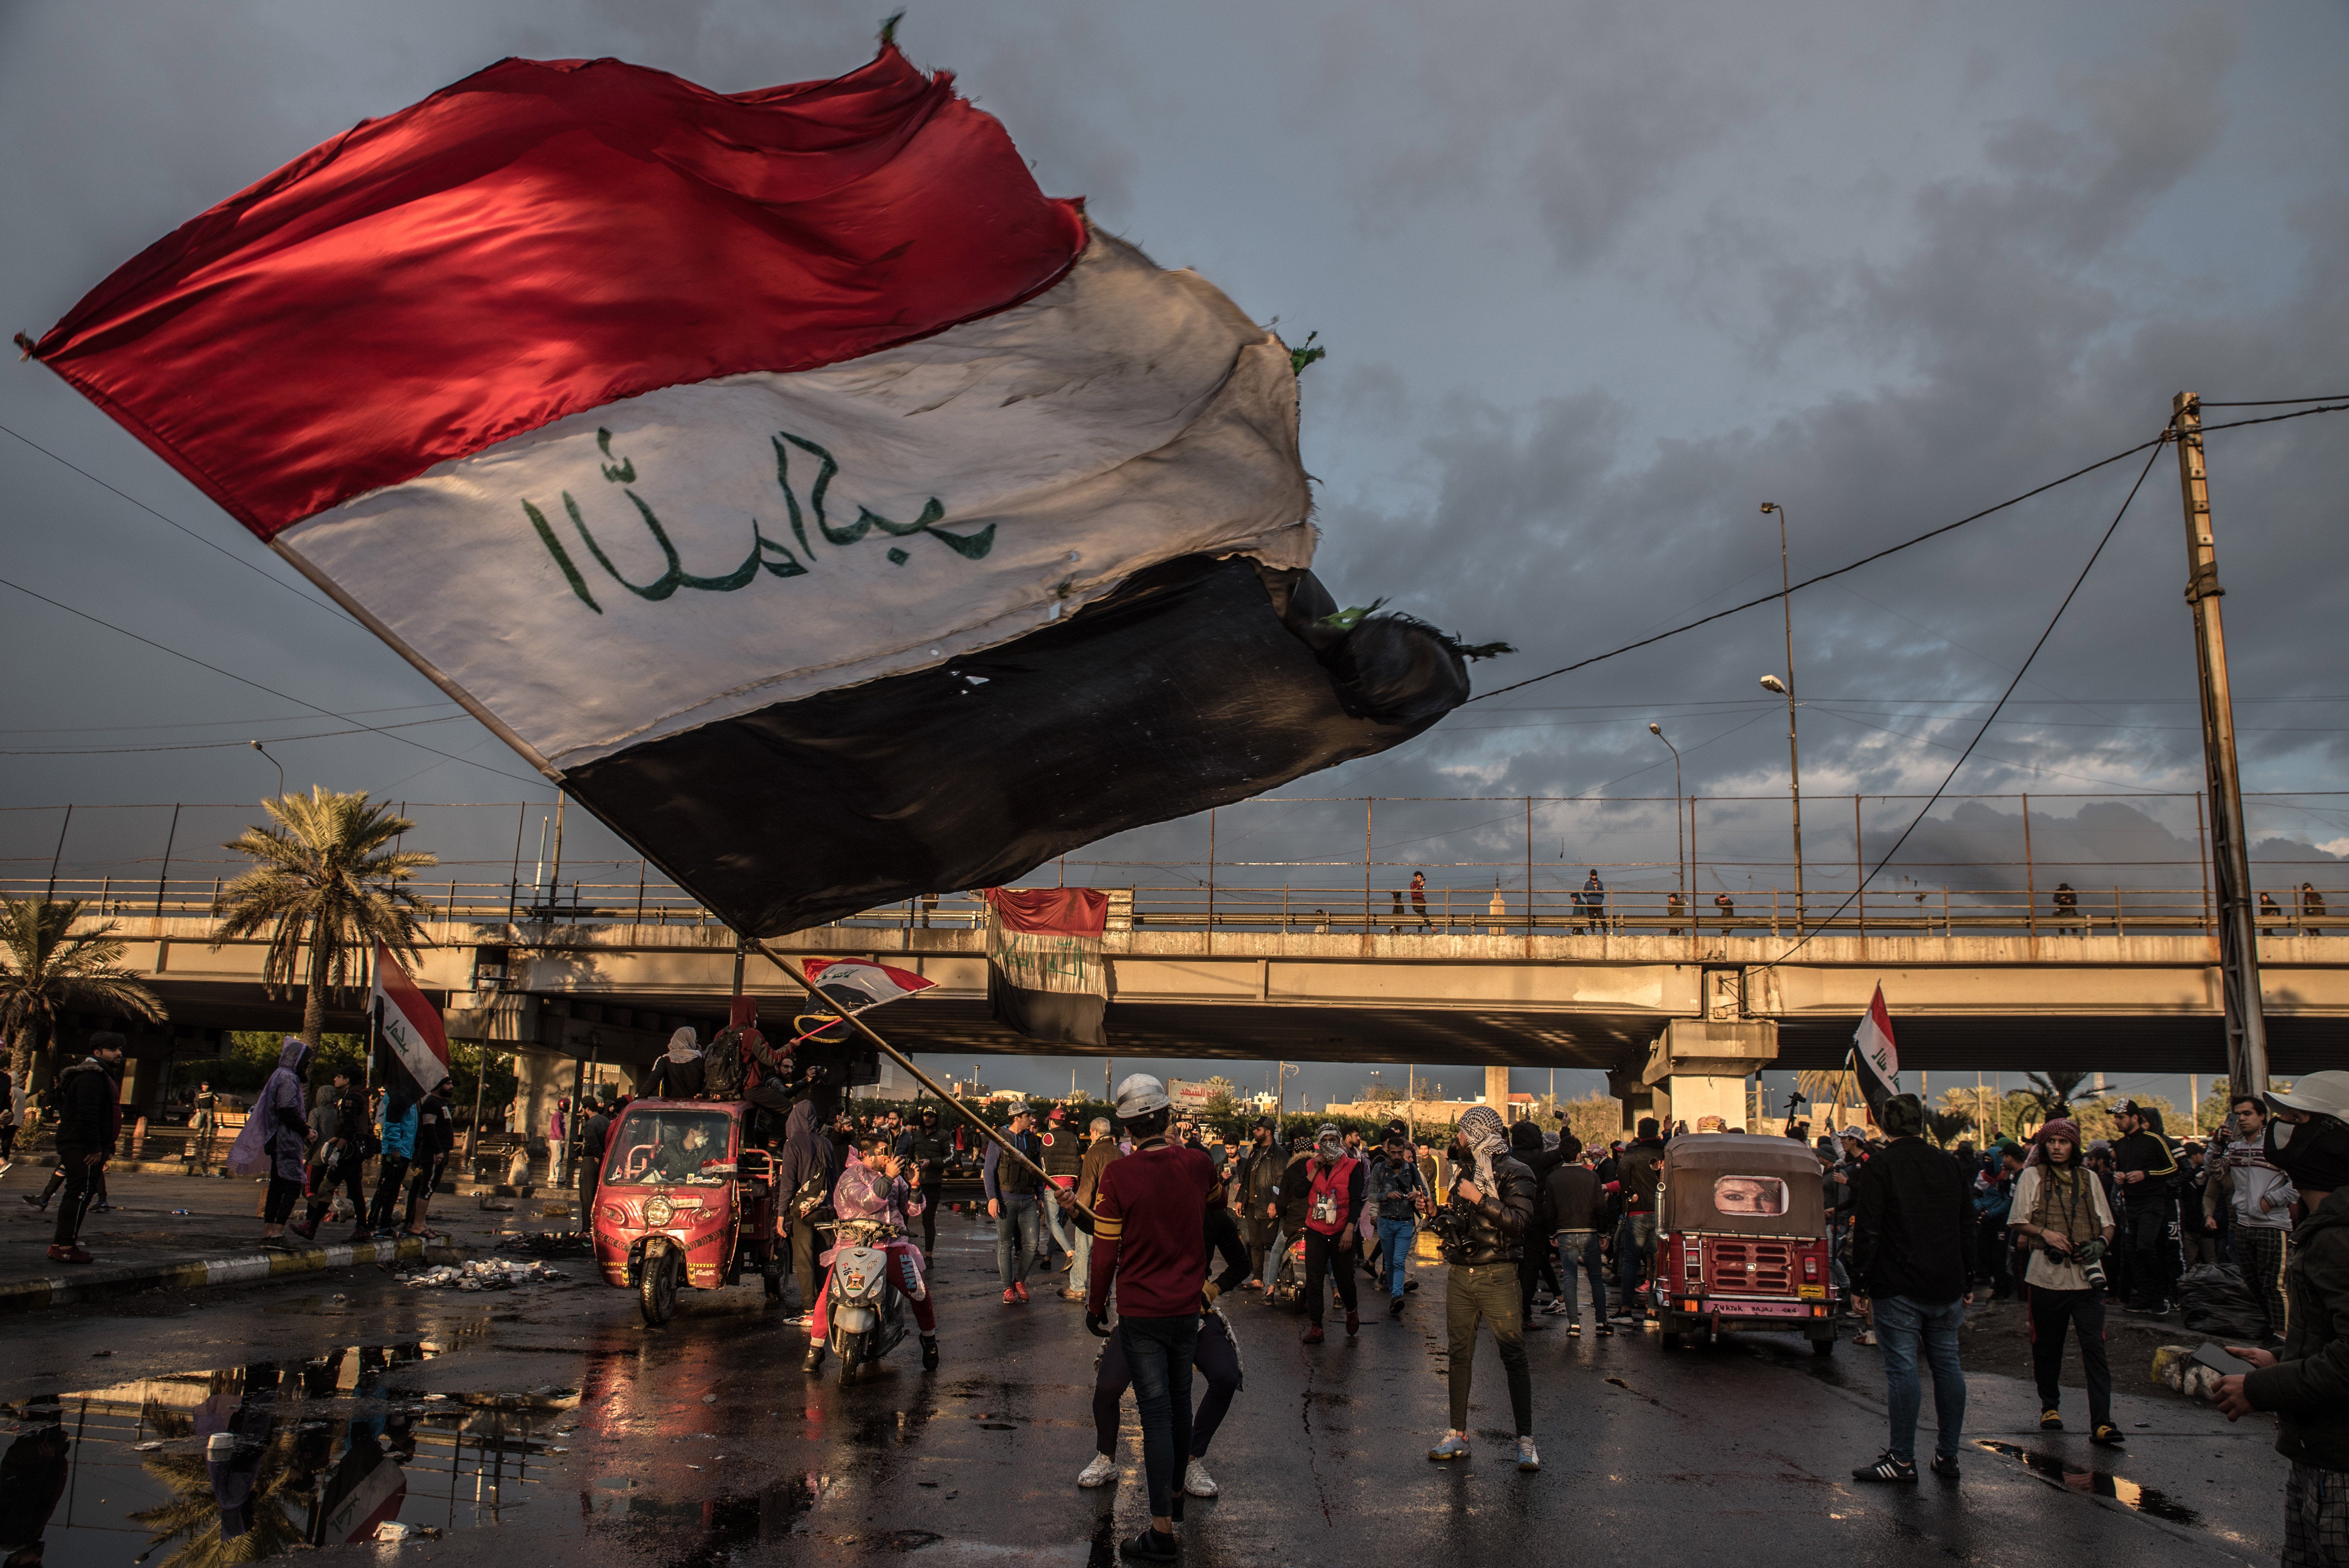 A man waves the Iraqi flag in Baghdad in January 2020 during a symbolic ‘funeral’ for a protester killed in clashes with security forces